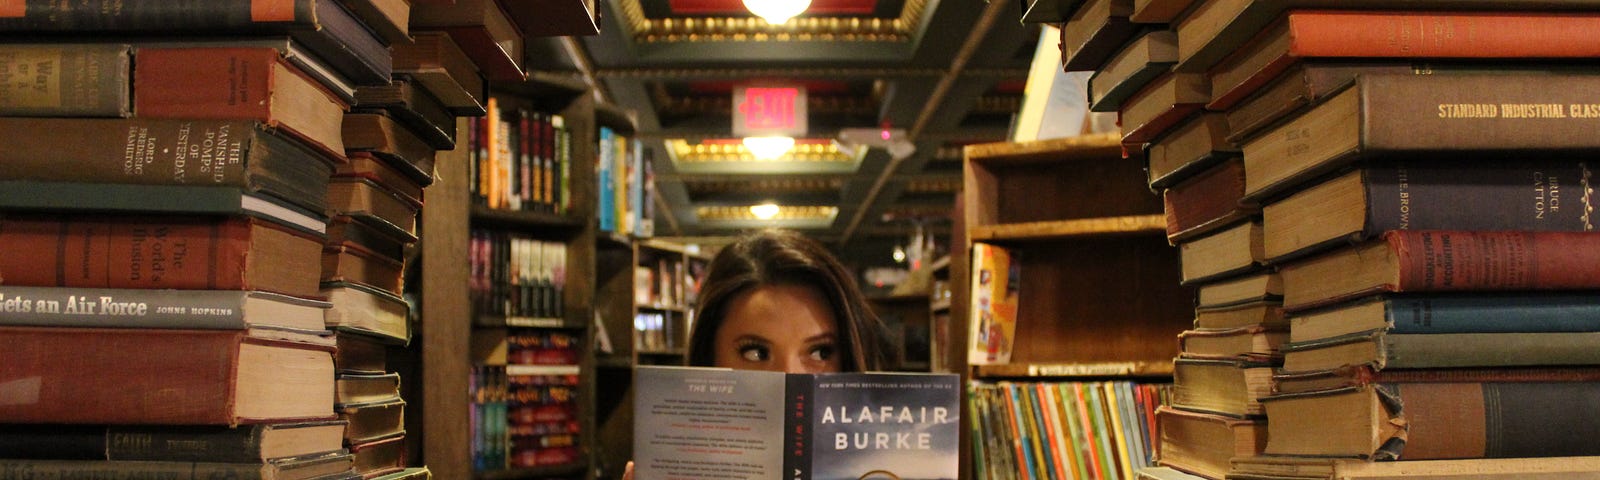 A woman reading a book while looking through a wall of books in a bookstore.